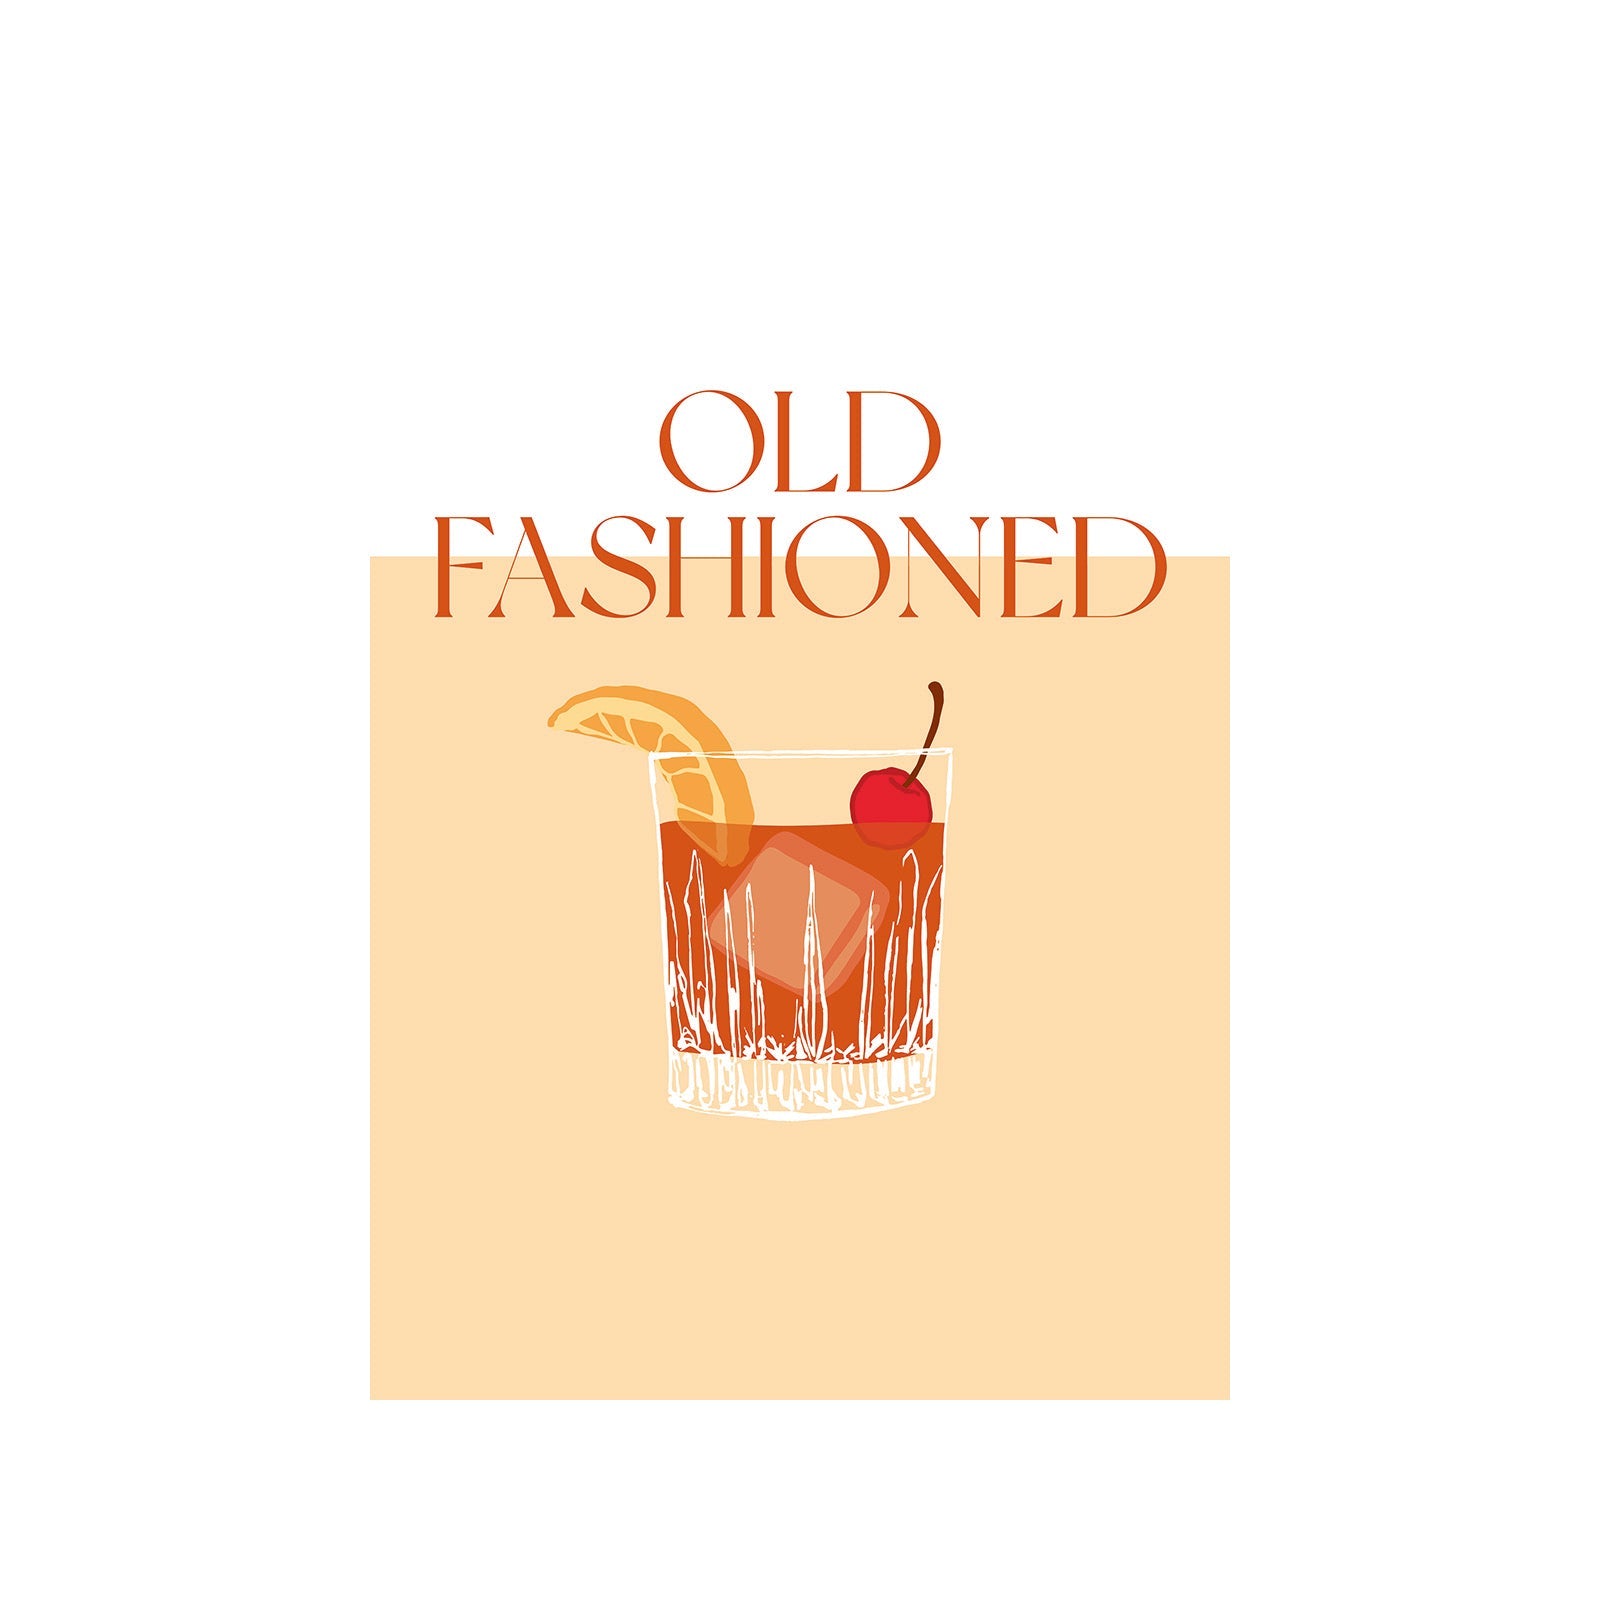 Old Fashioned Revival